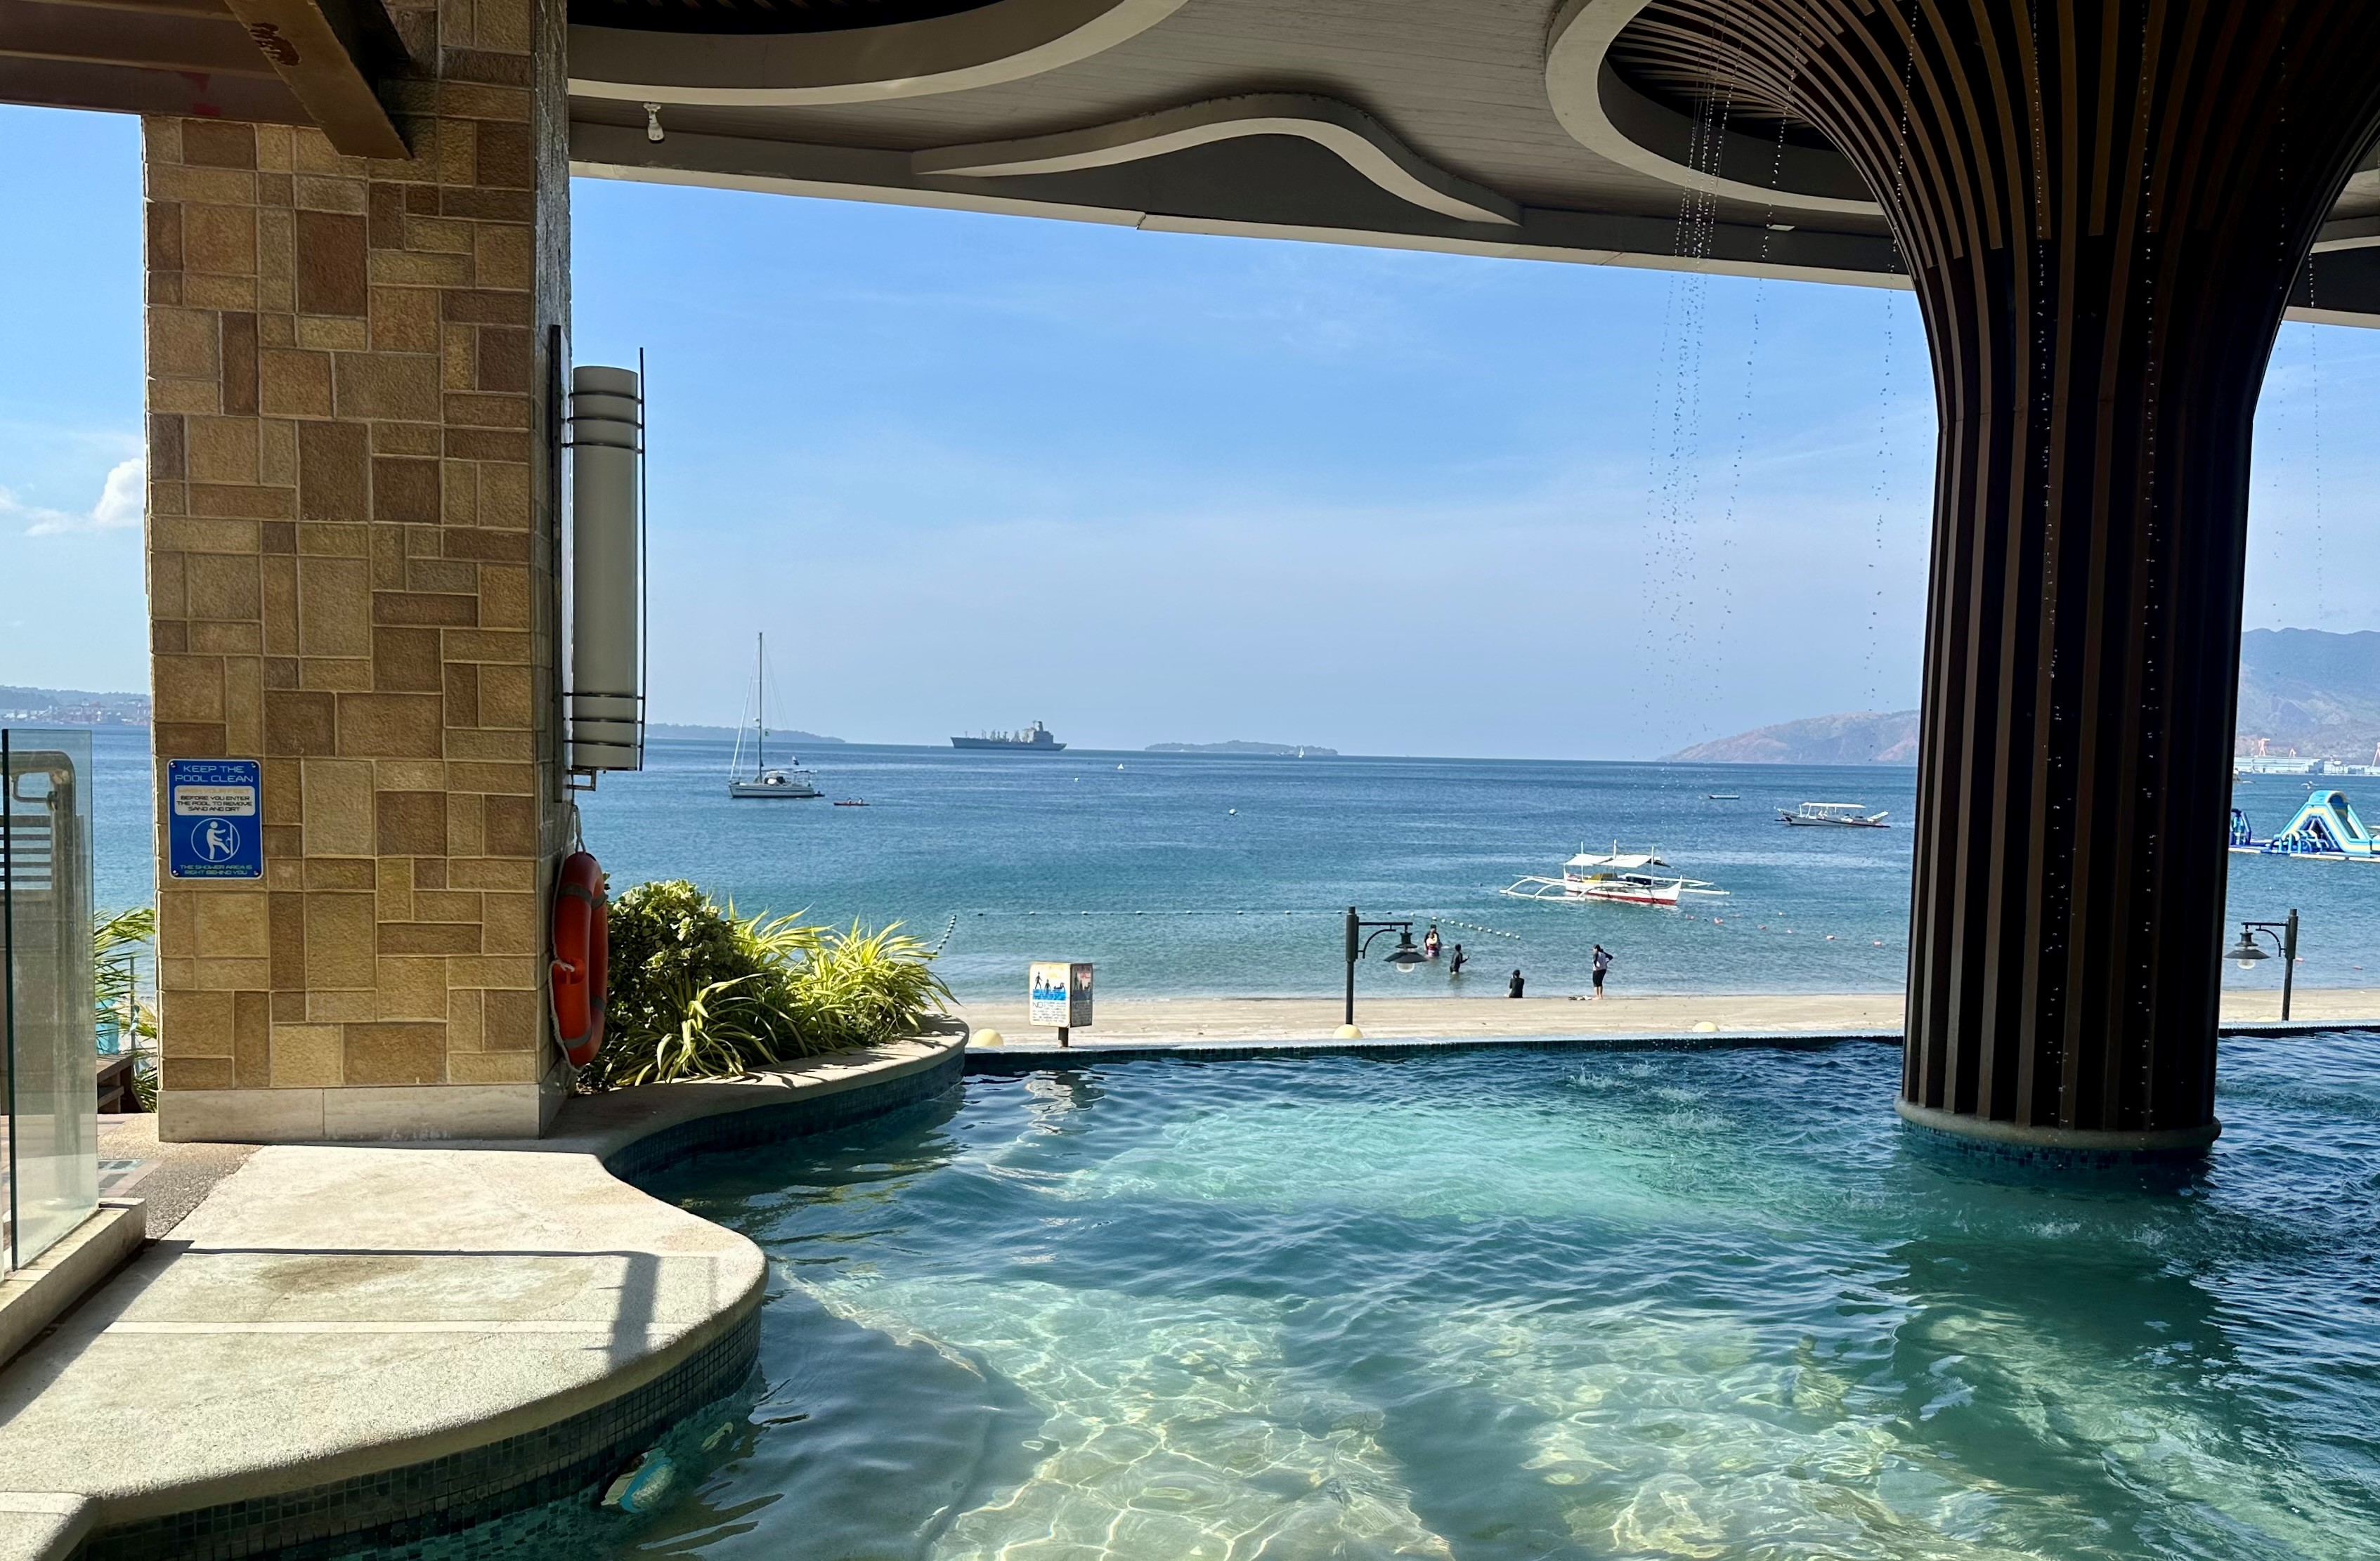 REVIEWED: Central Park Reef Resort, Subic Bay, Philippines – A Great Resort but why did They Keep This a Secret?